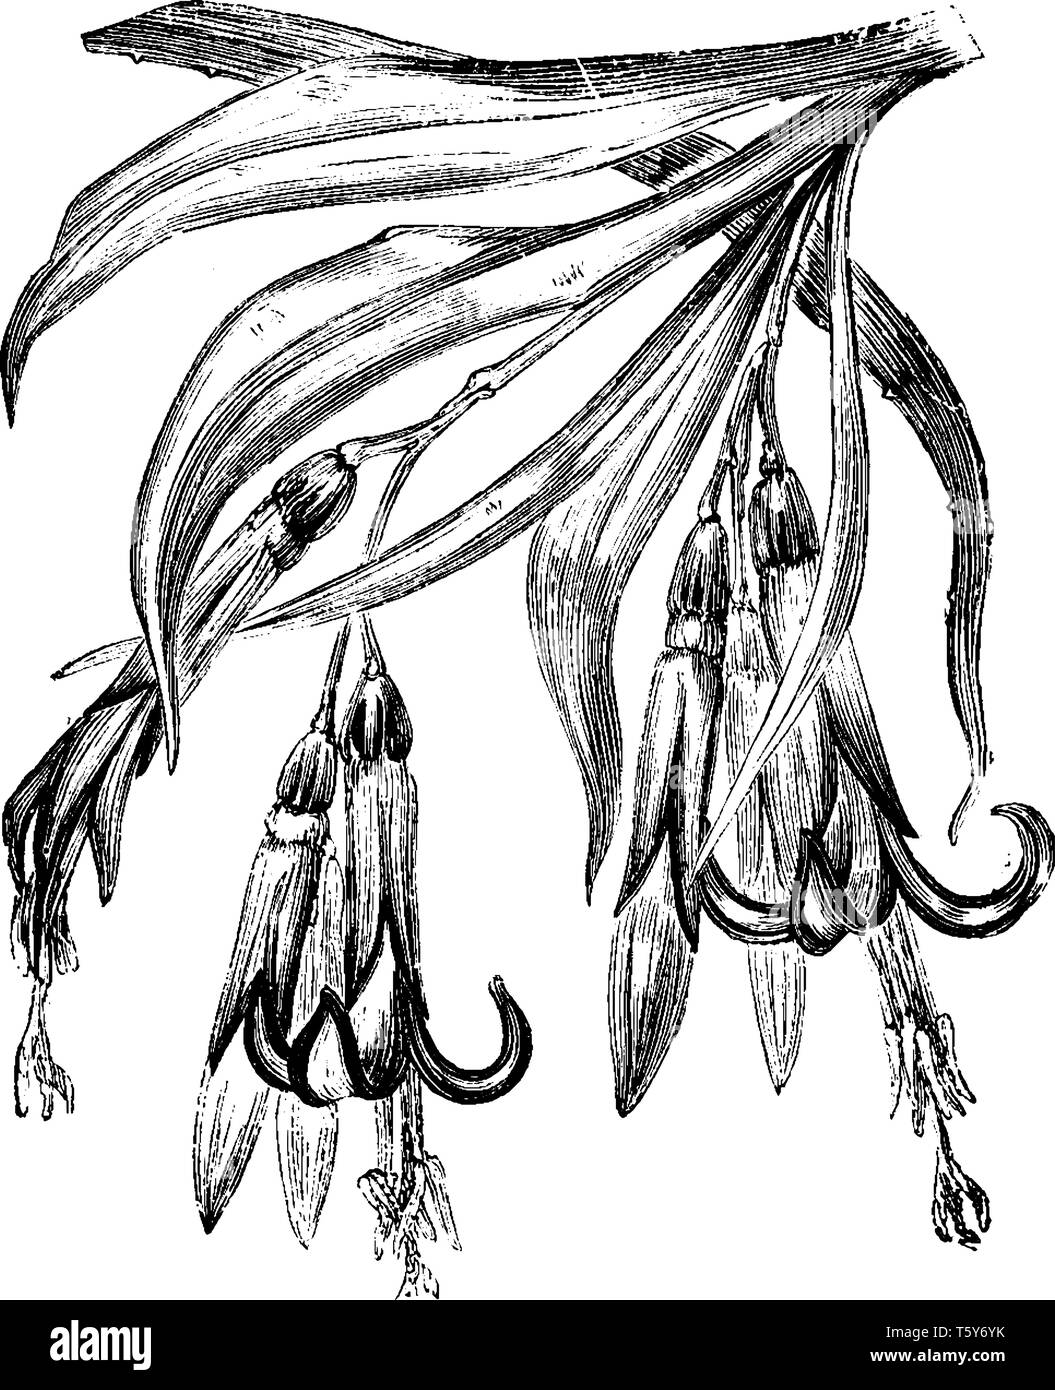 The flowers showing Billbergia Ntans. Seven to eight liner leaves pieces of stuff grow in a tube with tabular flower, vintage line drawing or engravin Stock Vector